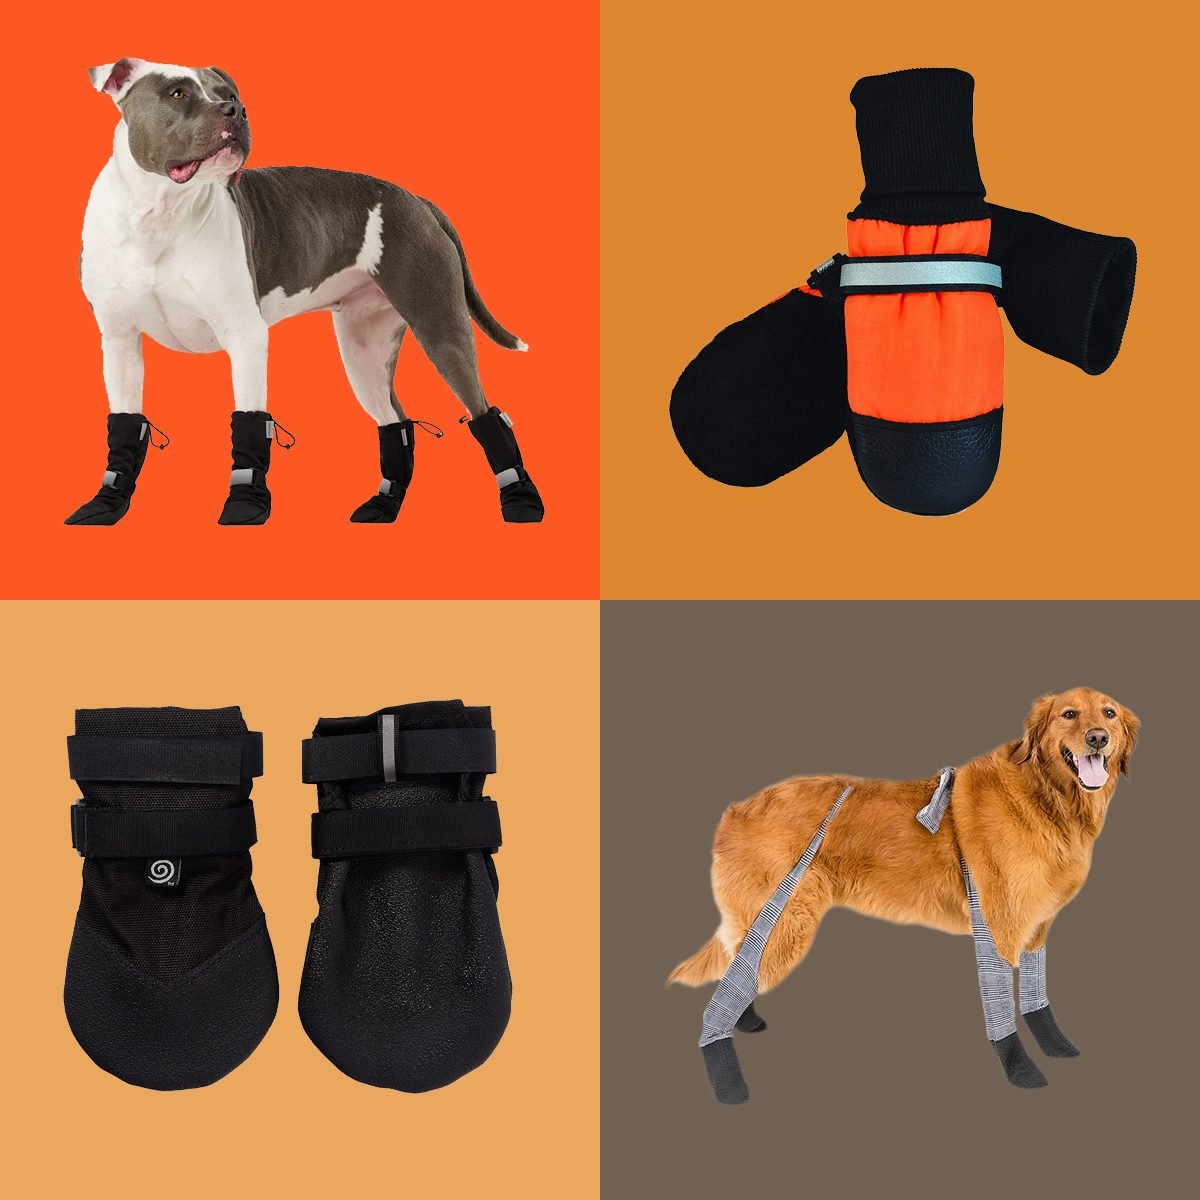 Is Your Pooch Slipping on the Floors? Dog Socks Can Help! – Dog Quality